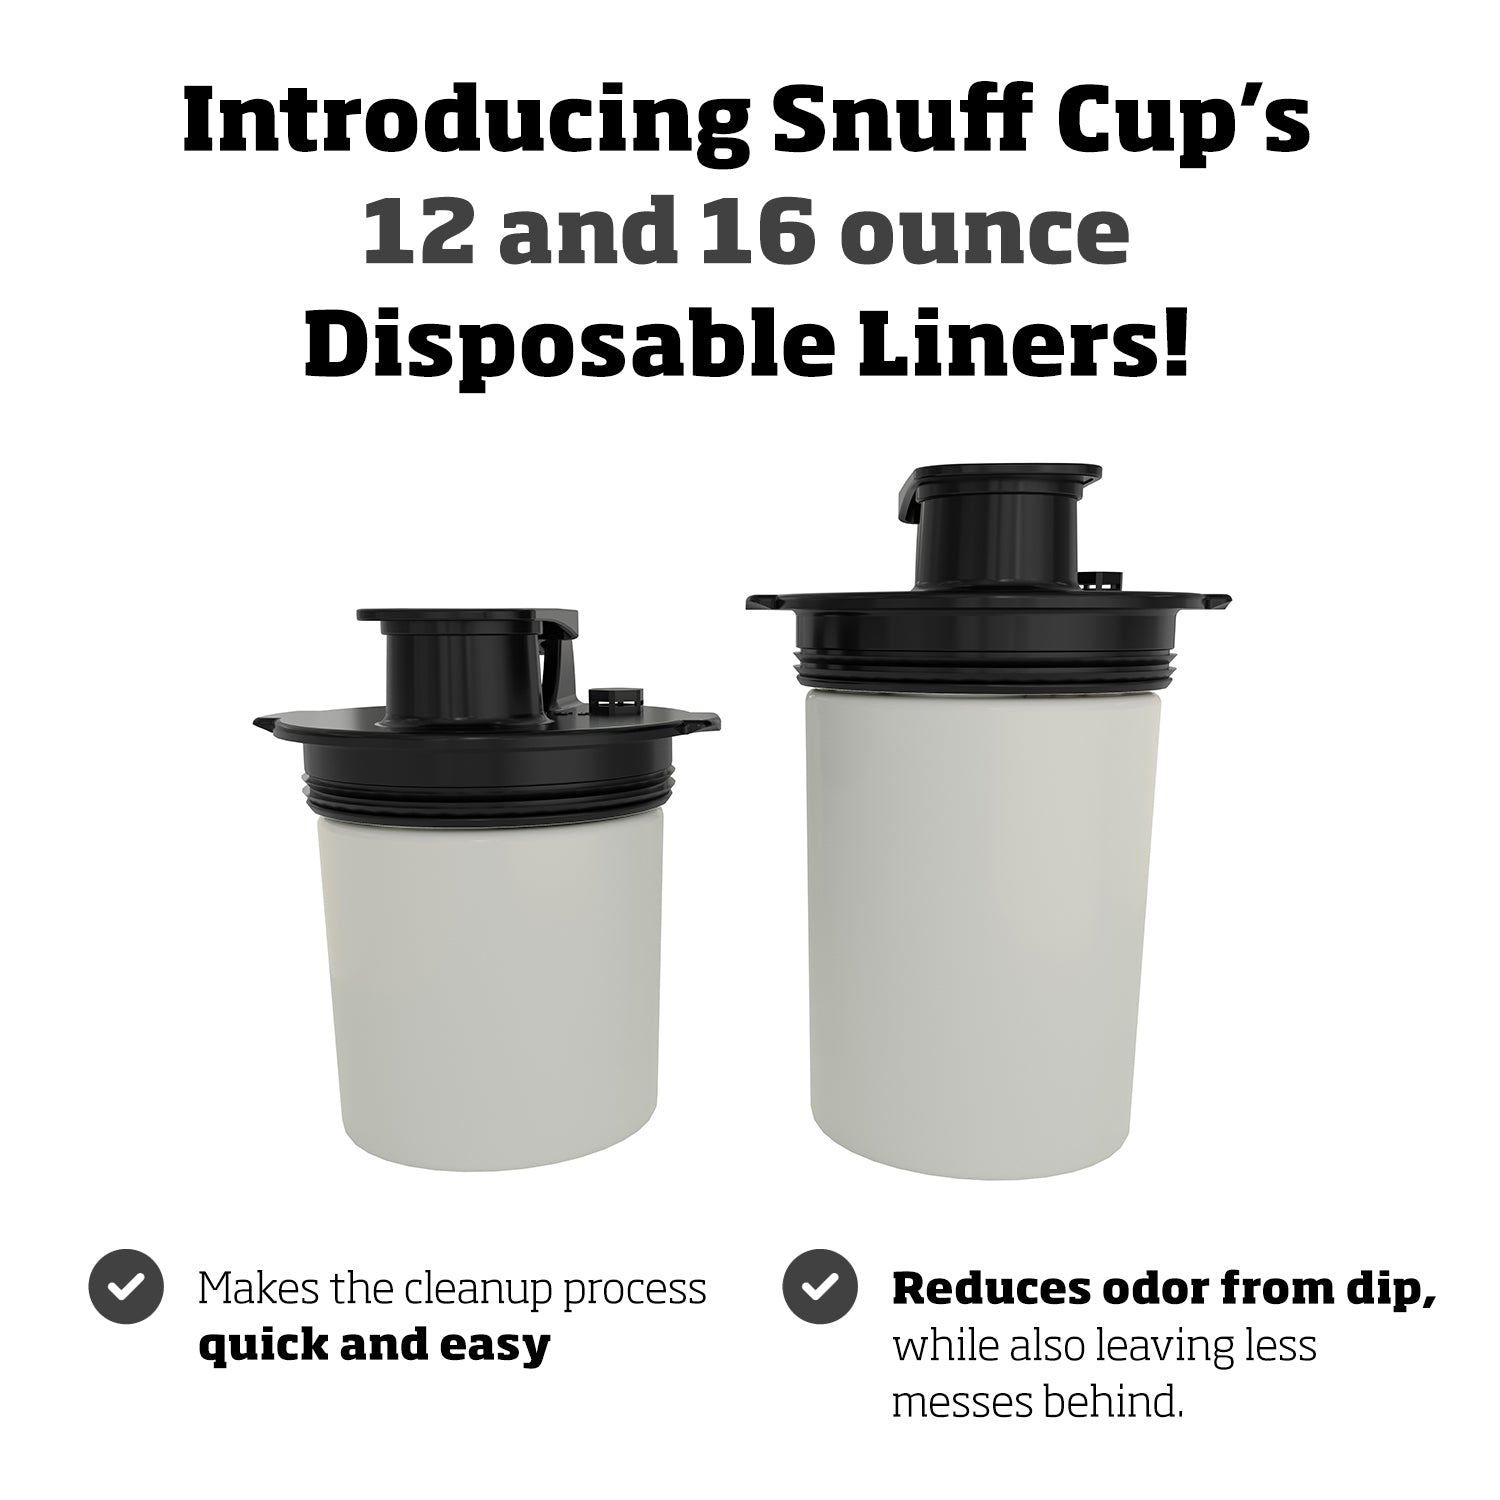 The Snuff Cup Pro™